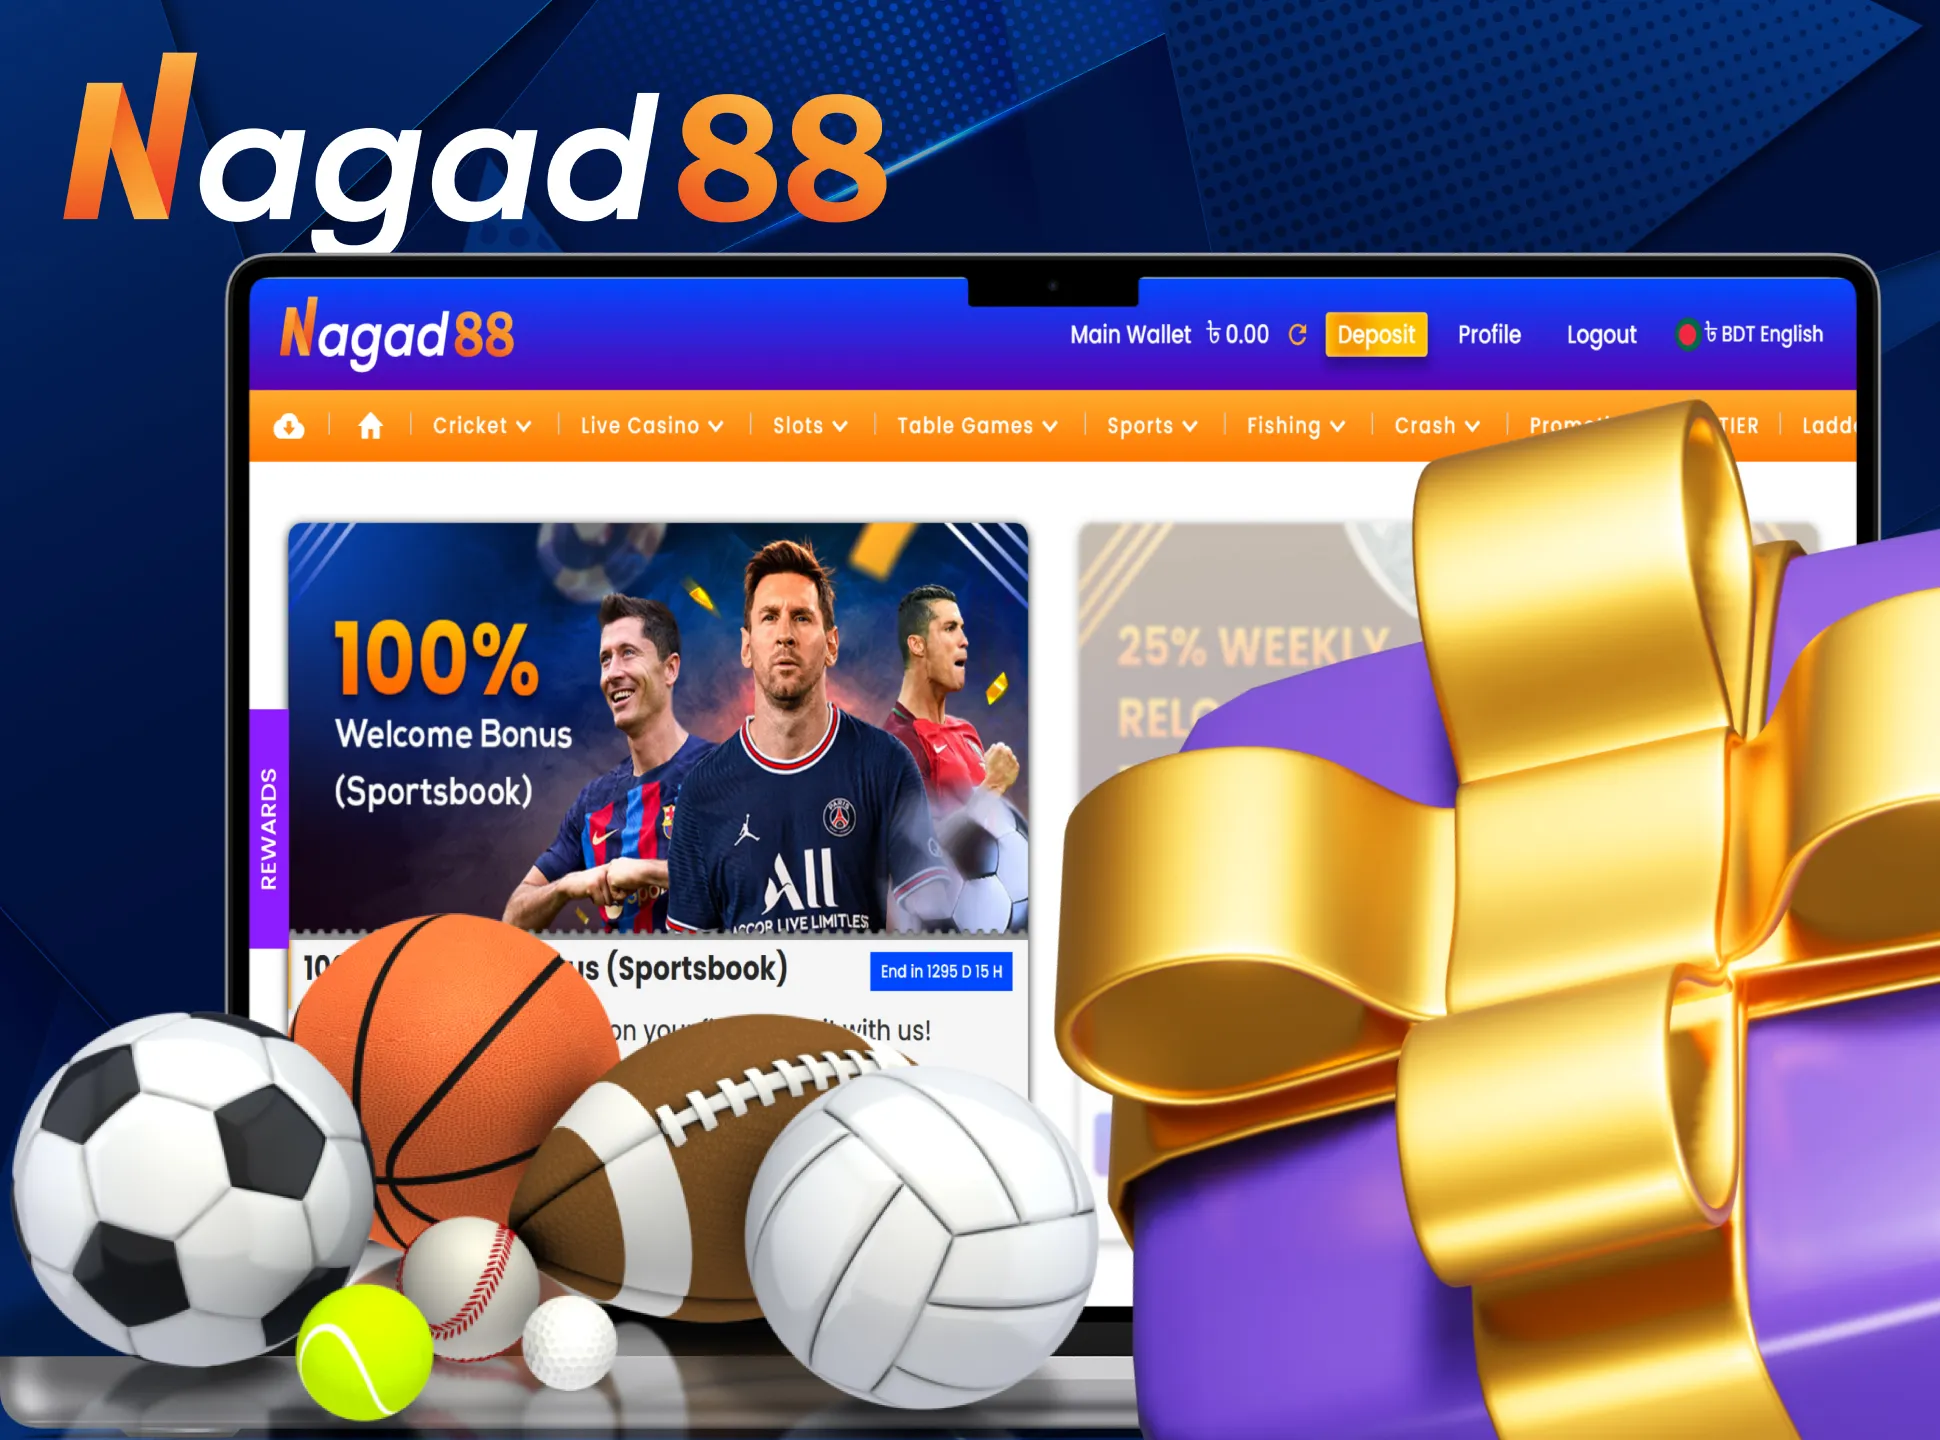 Take advantage of the welcome sport bonus from Nagad88 for betting.